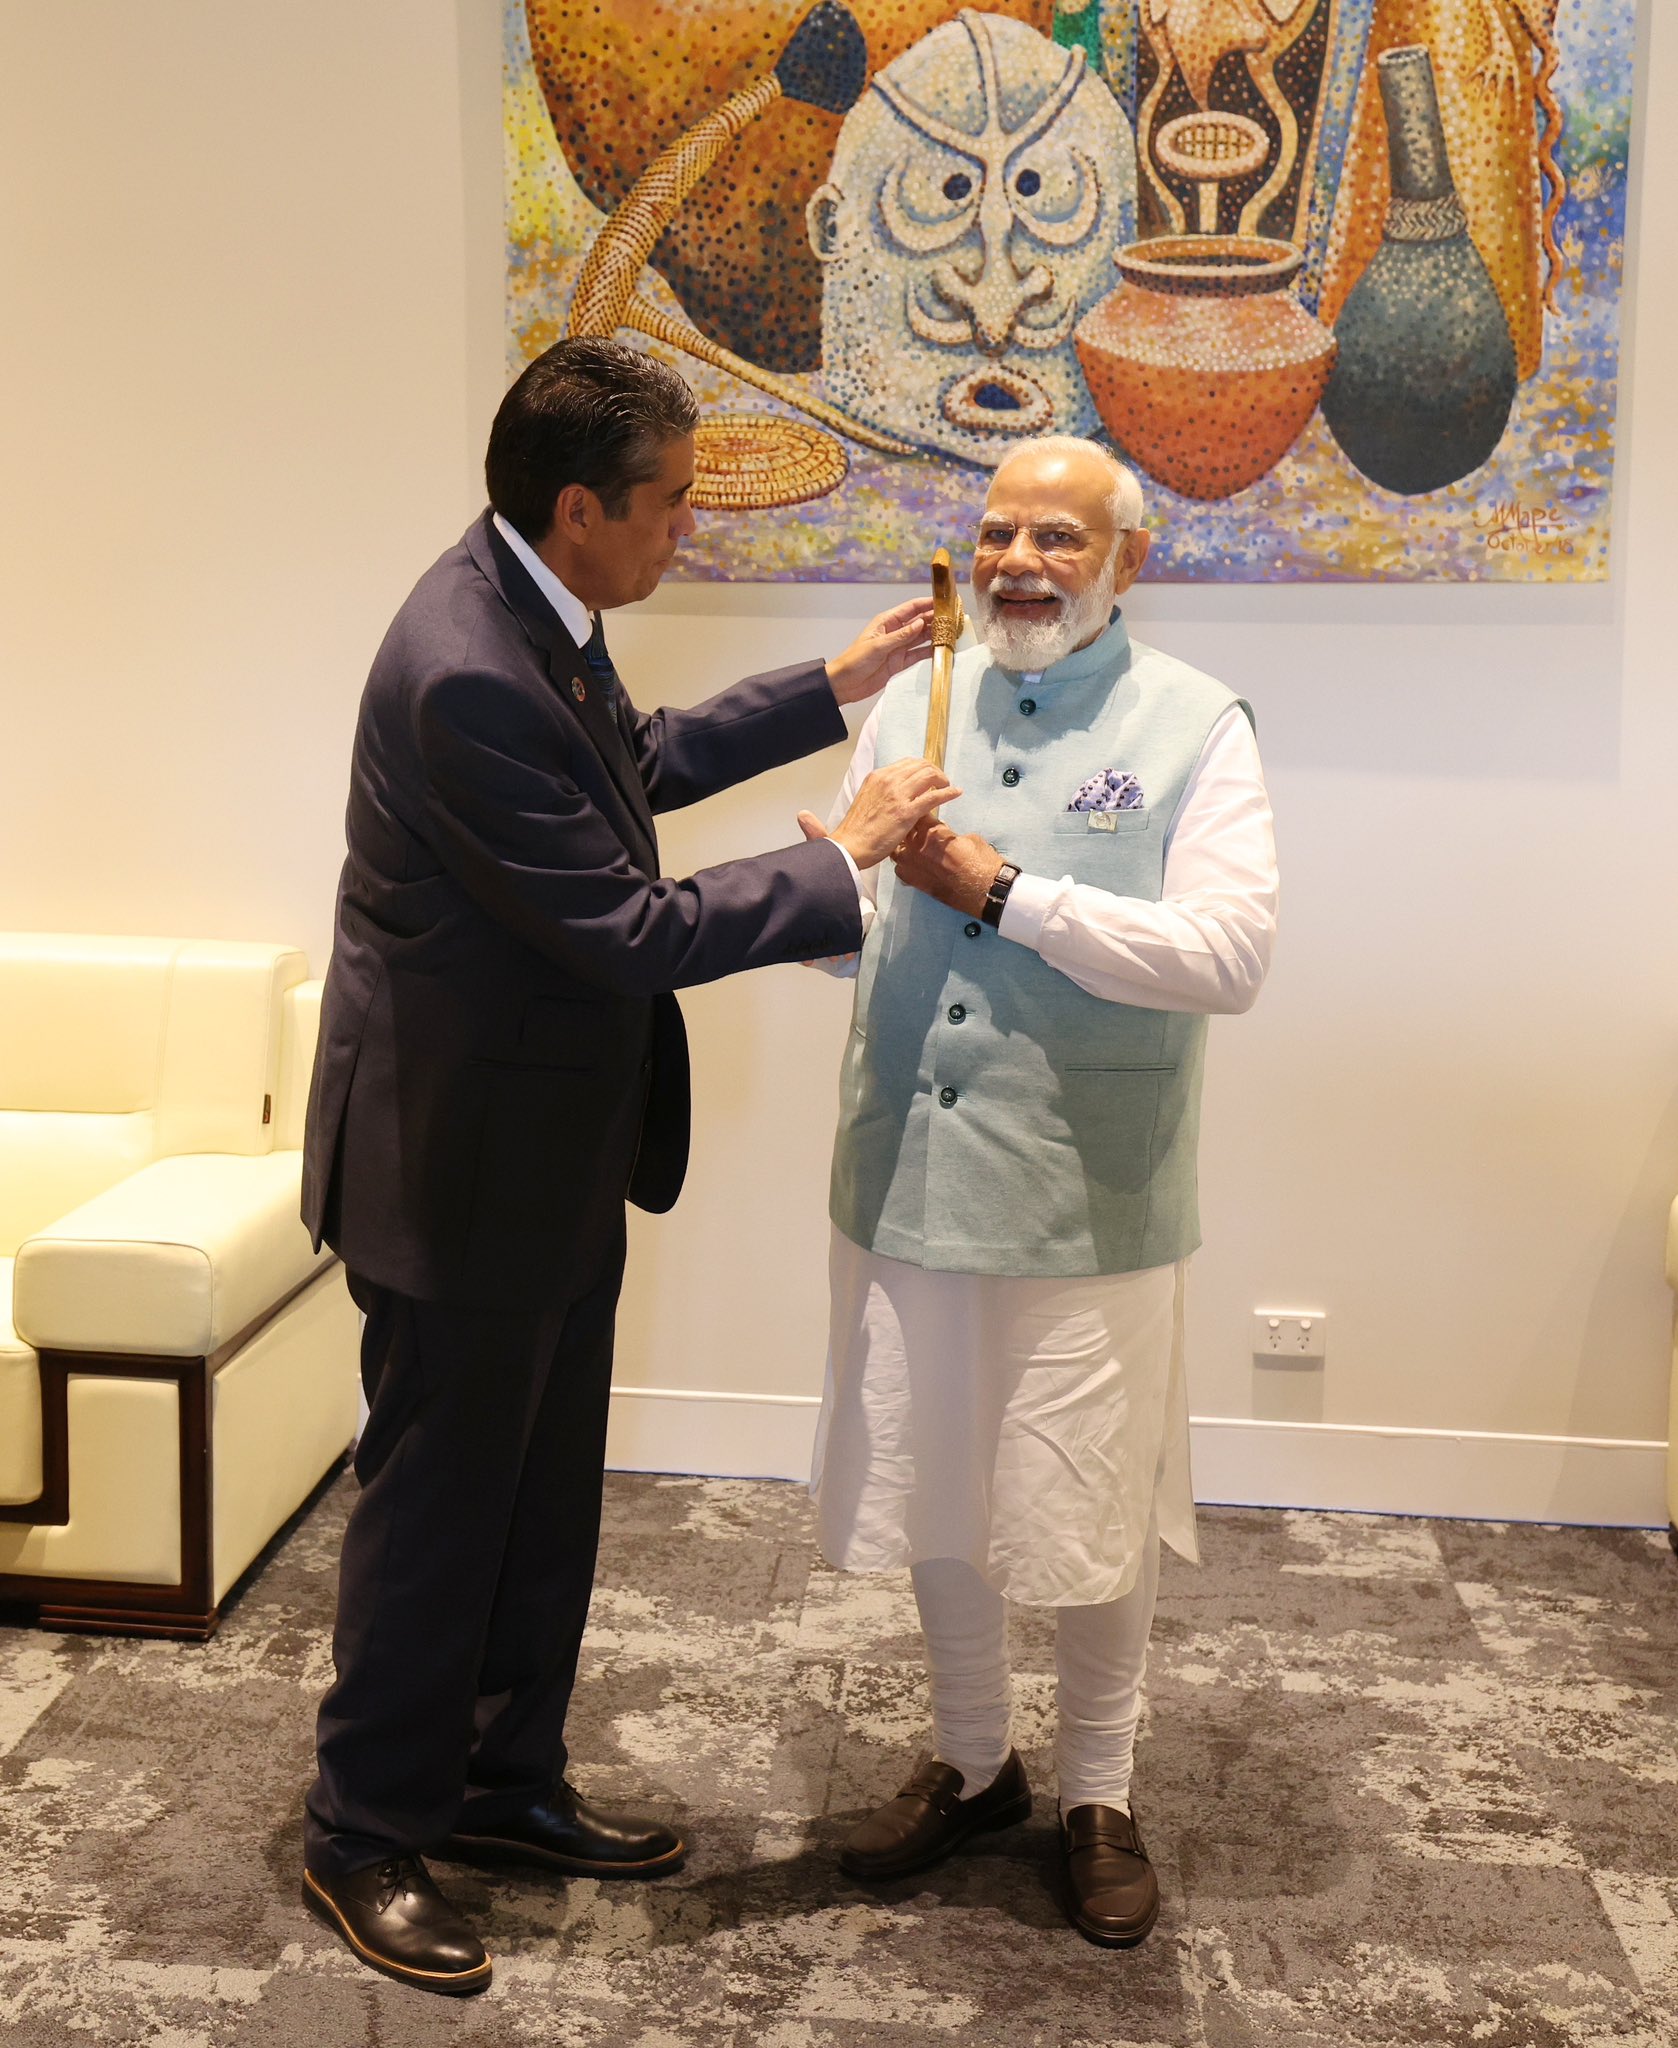 modi-papua-new-guinea-modi-key-comments-on-developed-countries-in-fipic-summit